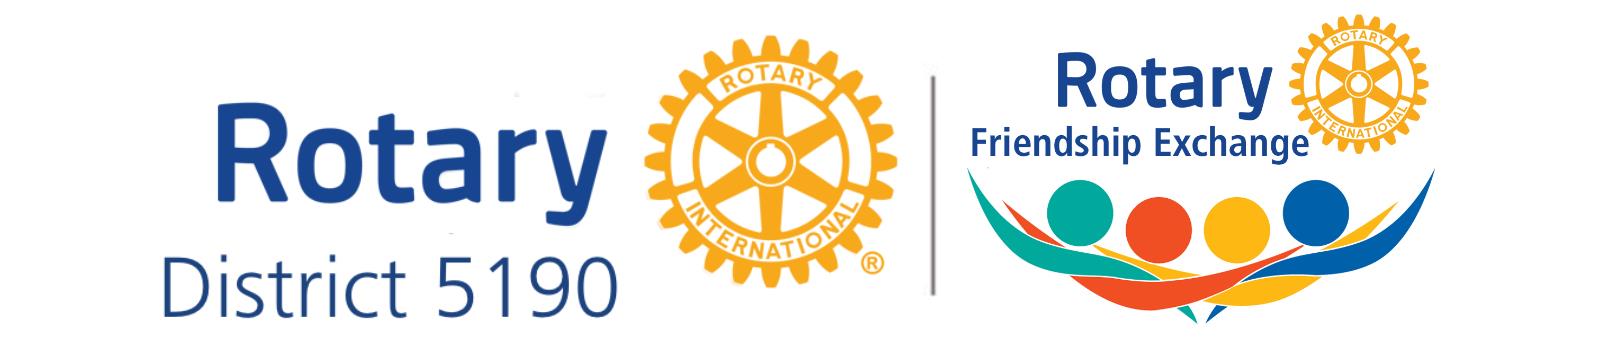 What is a Rotary Friendship Exchange? | District 5190